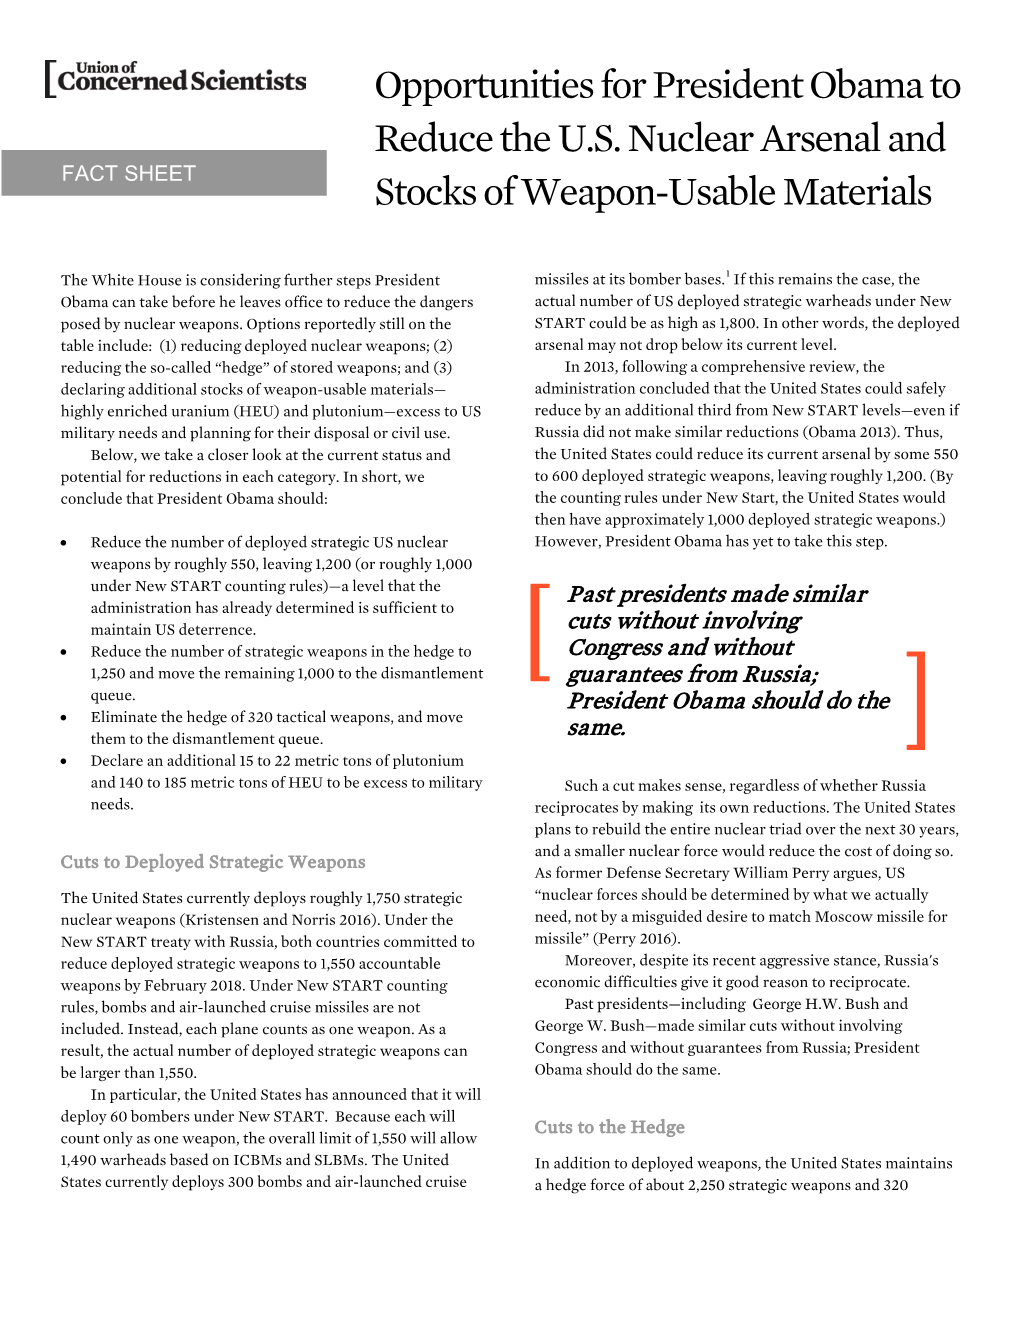 Opportunities for President Obama to Reduce the U.S. Nuclear Arsenal and Stocks of Weapon-Usable Materials